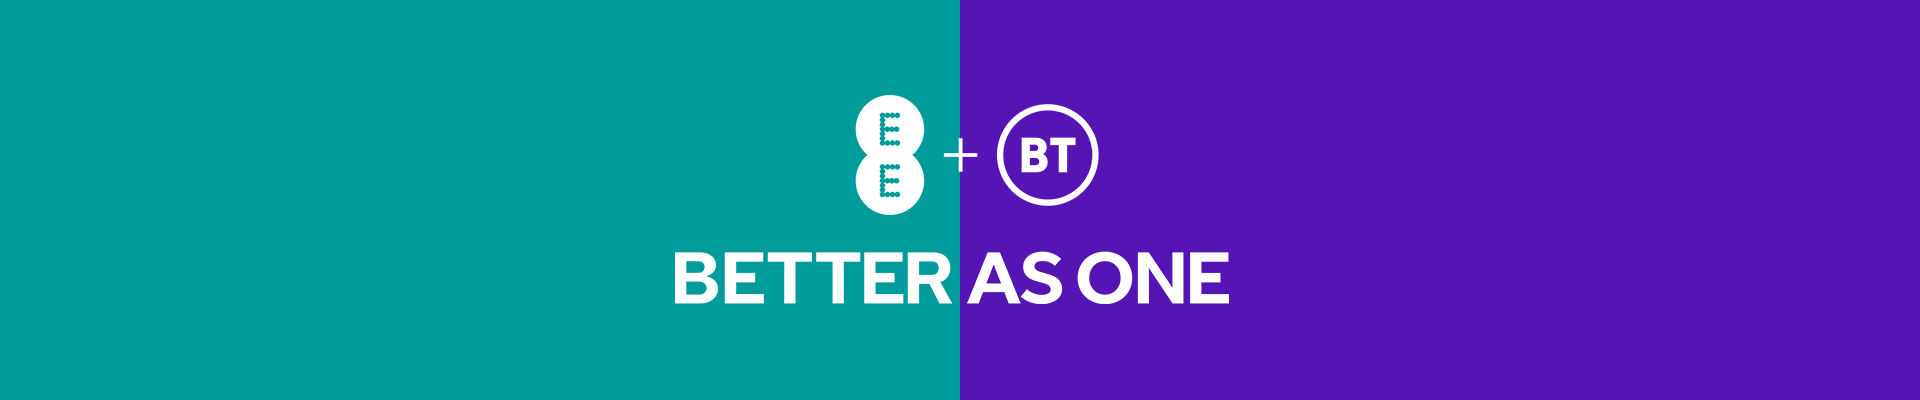 EE plus BT, better as one.